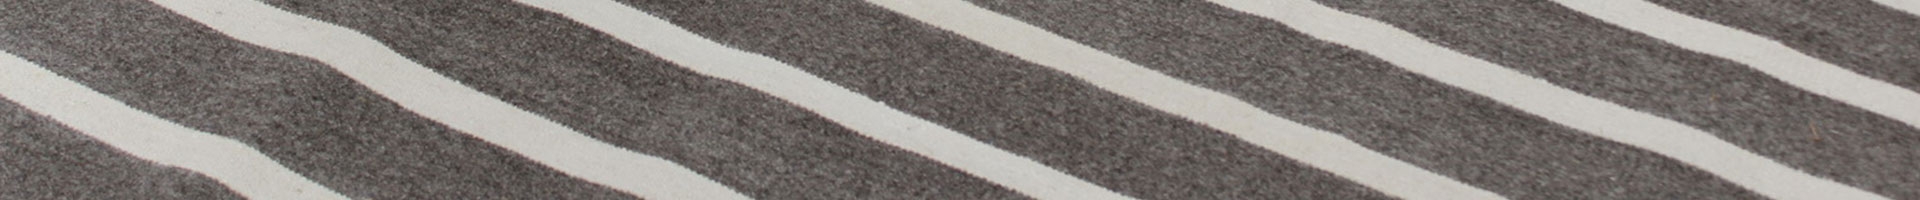 Striped special carpets with special colors